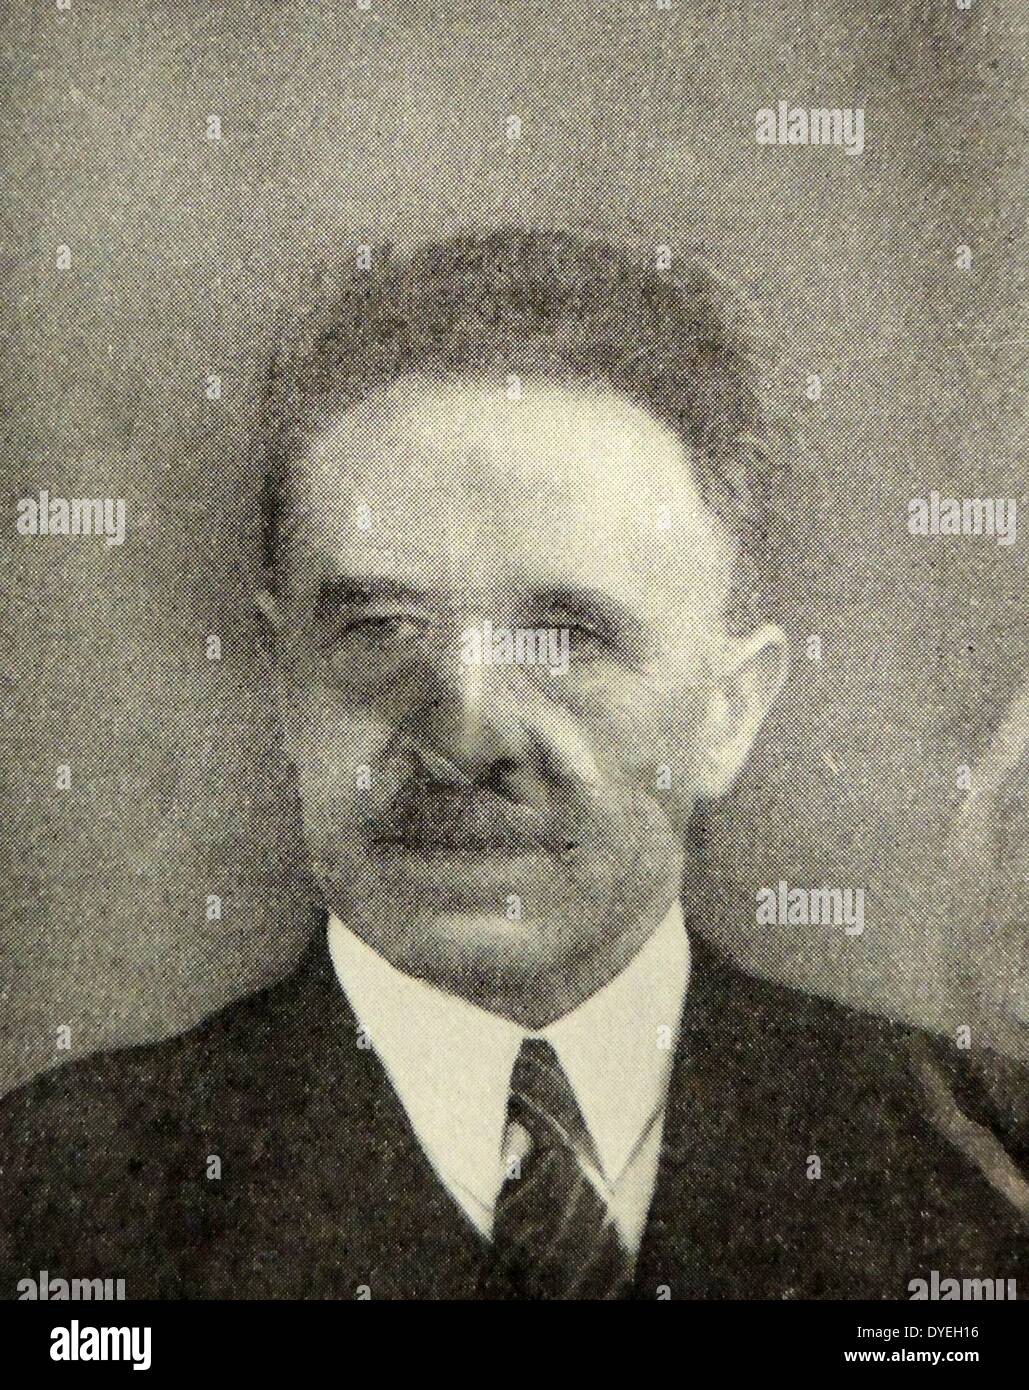 World War II - Professor Leo Polak, 9th December 1941. The philosopher and criminal law theorist, freethinker and atheist Leo Polak (1880-1941) was from 1928 till his death Professor of History of Philosophy, Logic and Metaphysics at the University of Groningen. Stock Photo